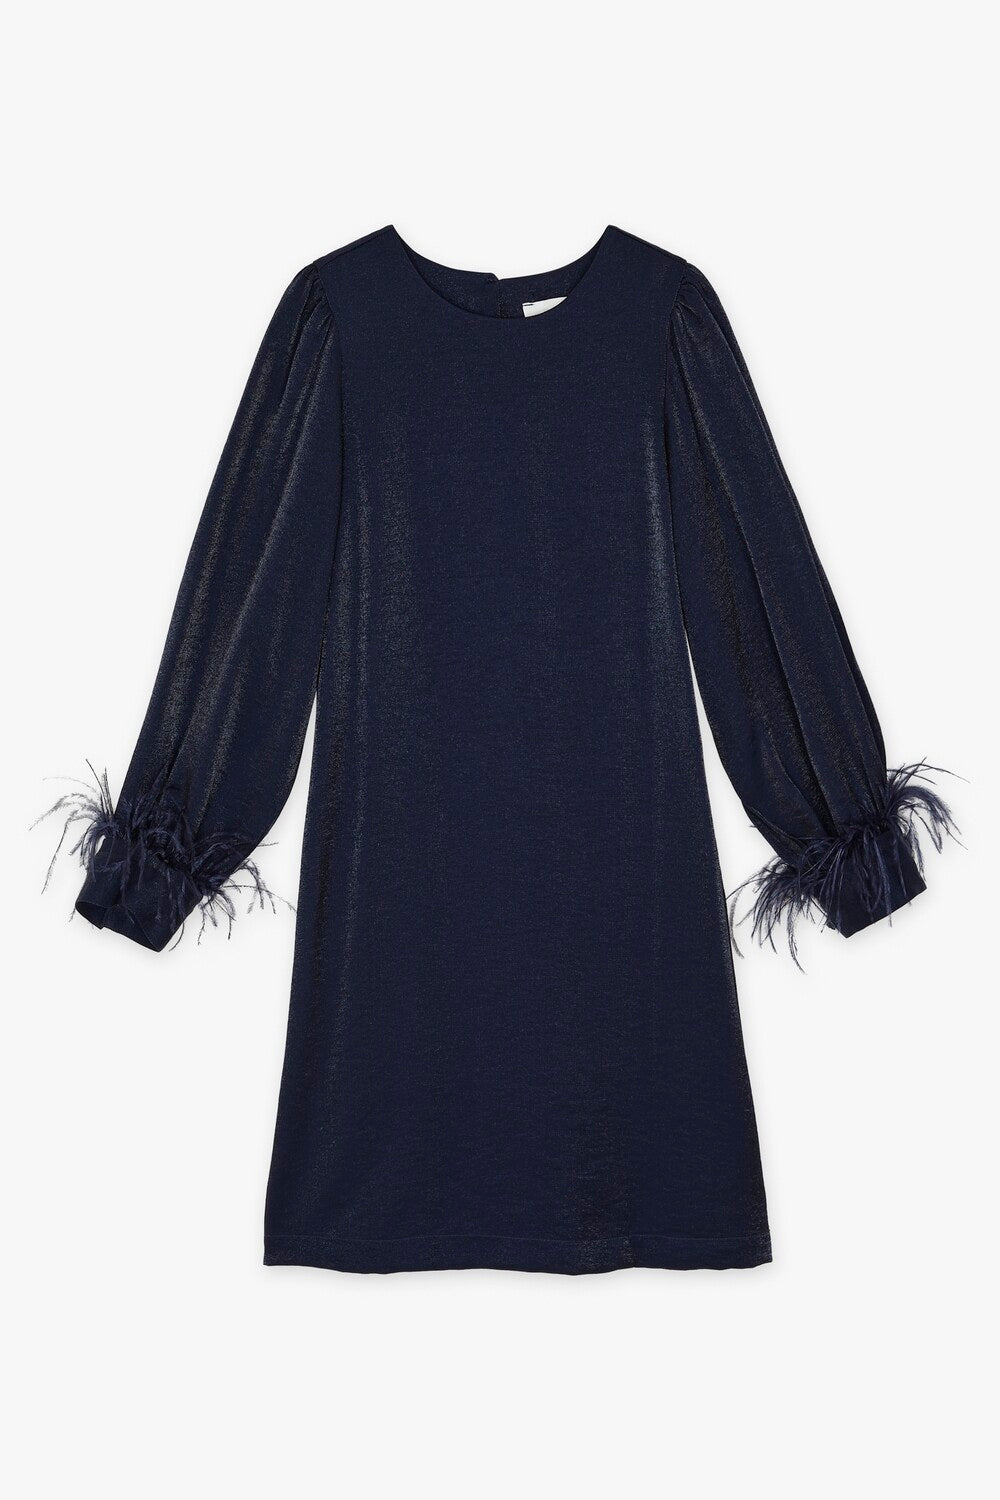 CKS - Dress with Feathers - Diede